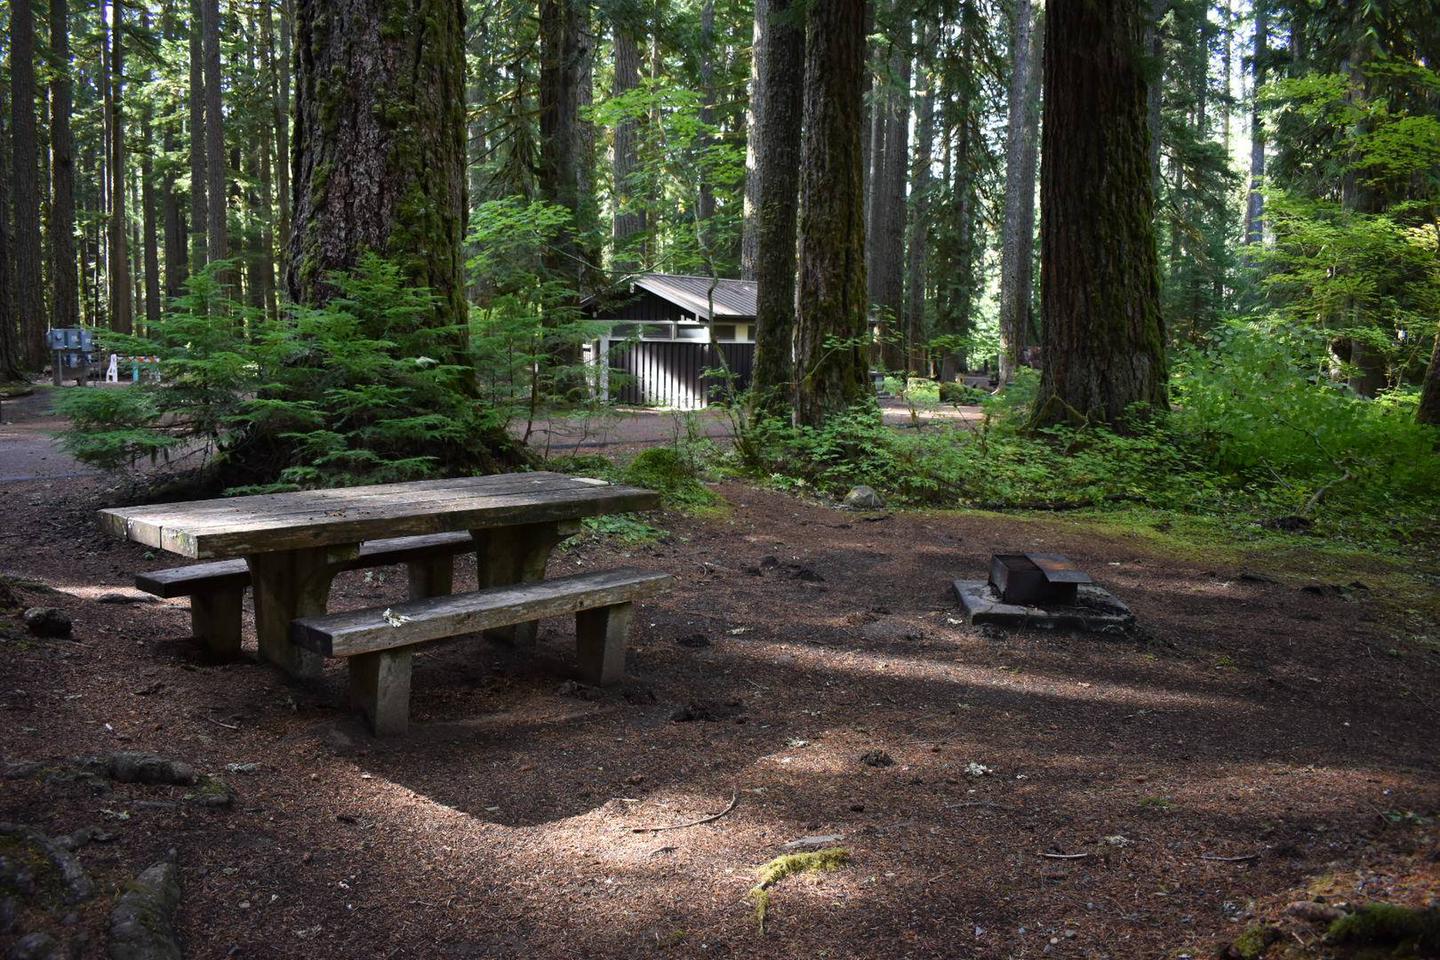 Campers are provided with a picnic table and a fire pit.